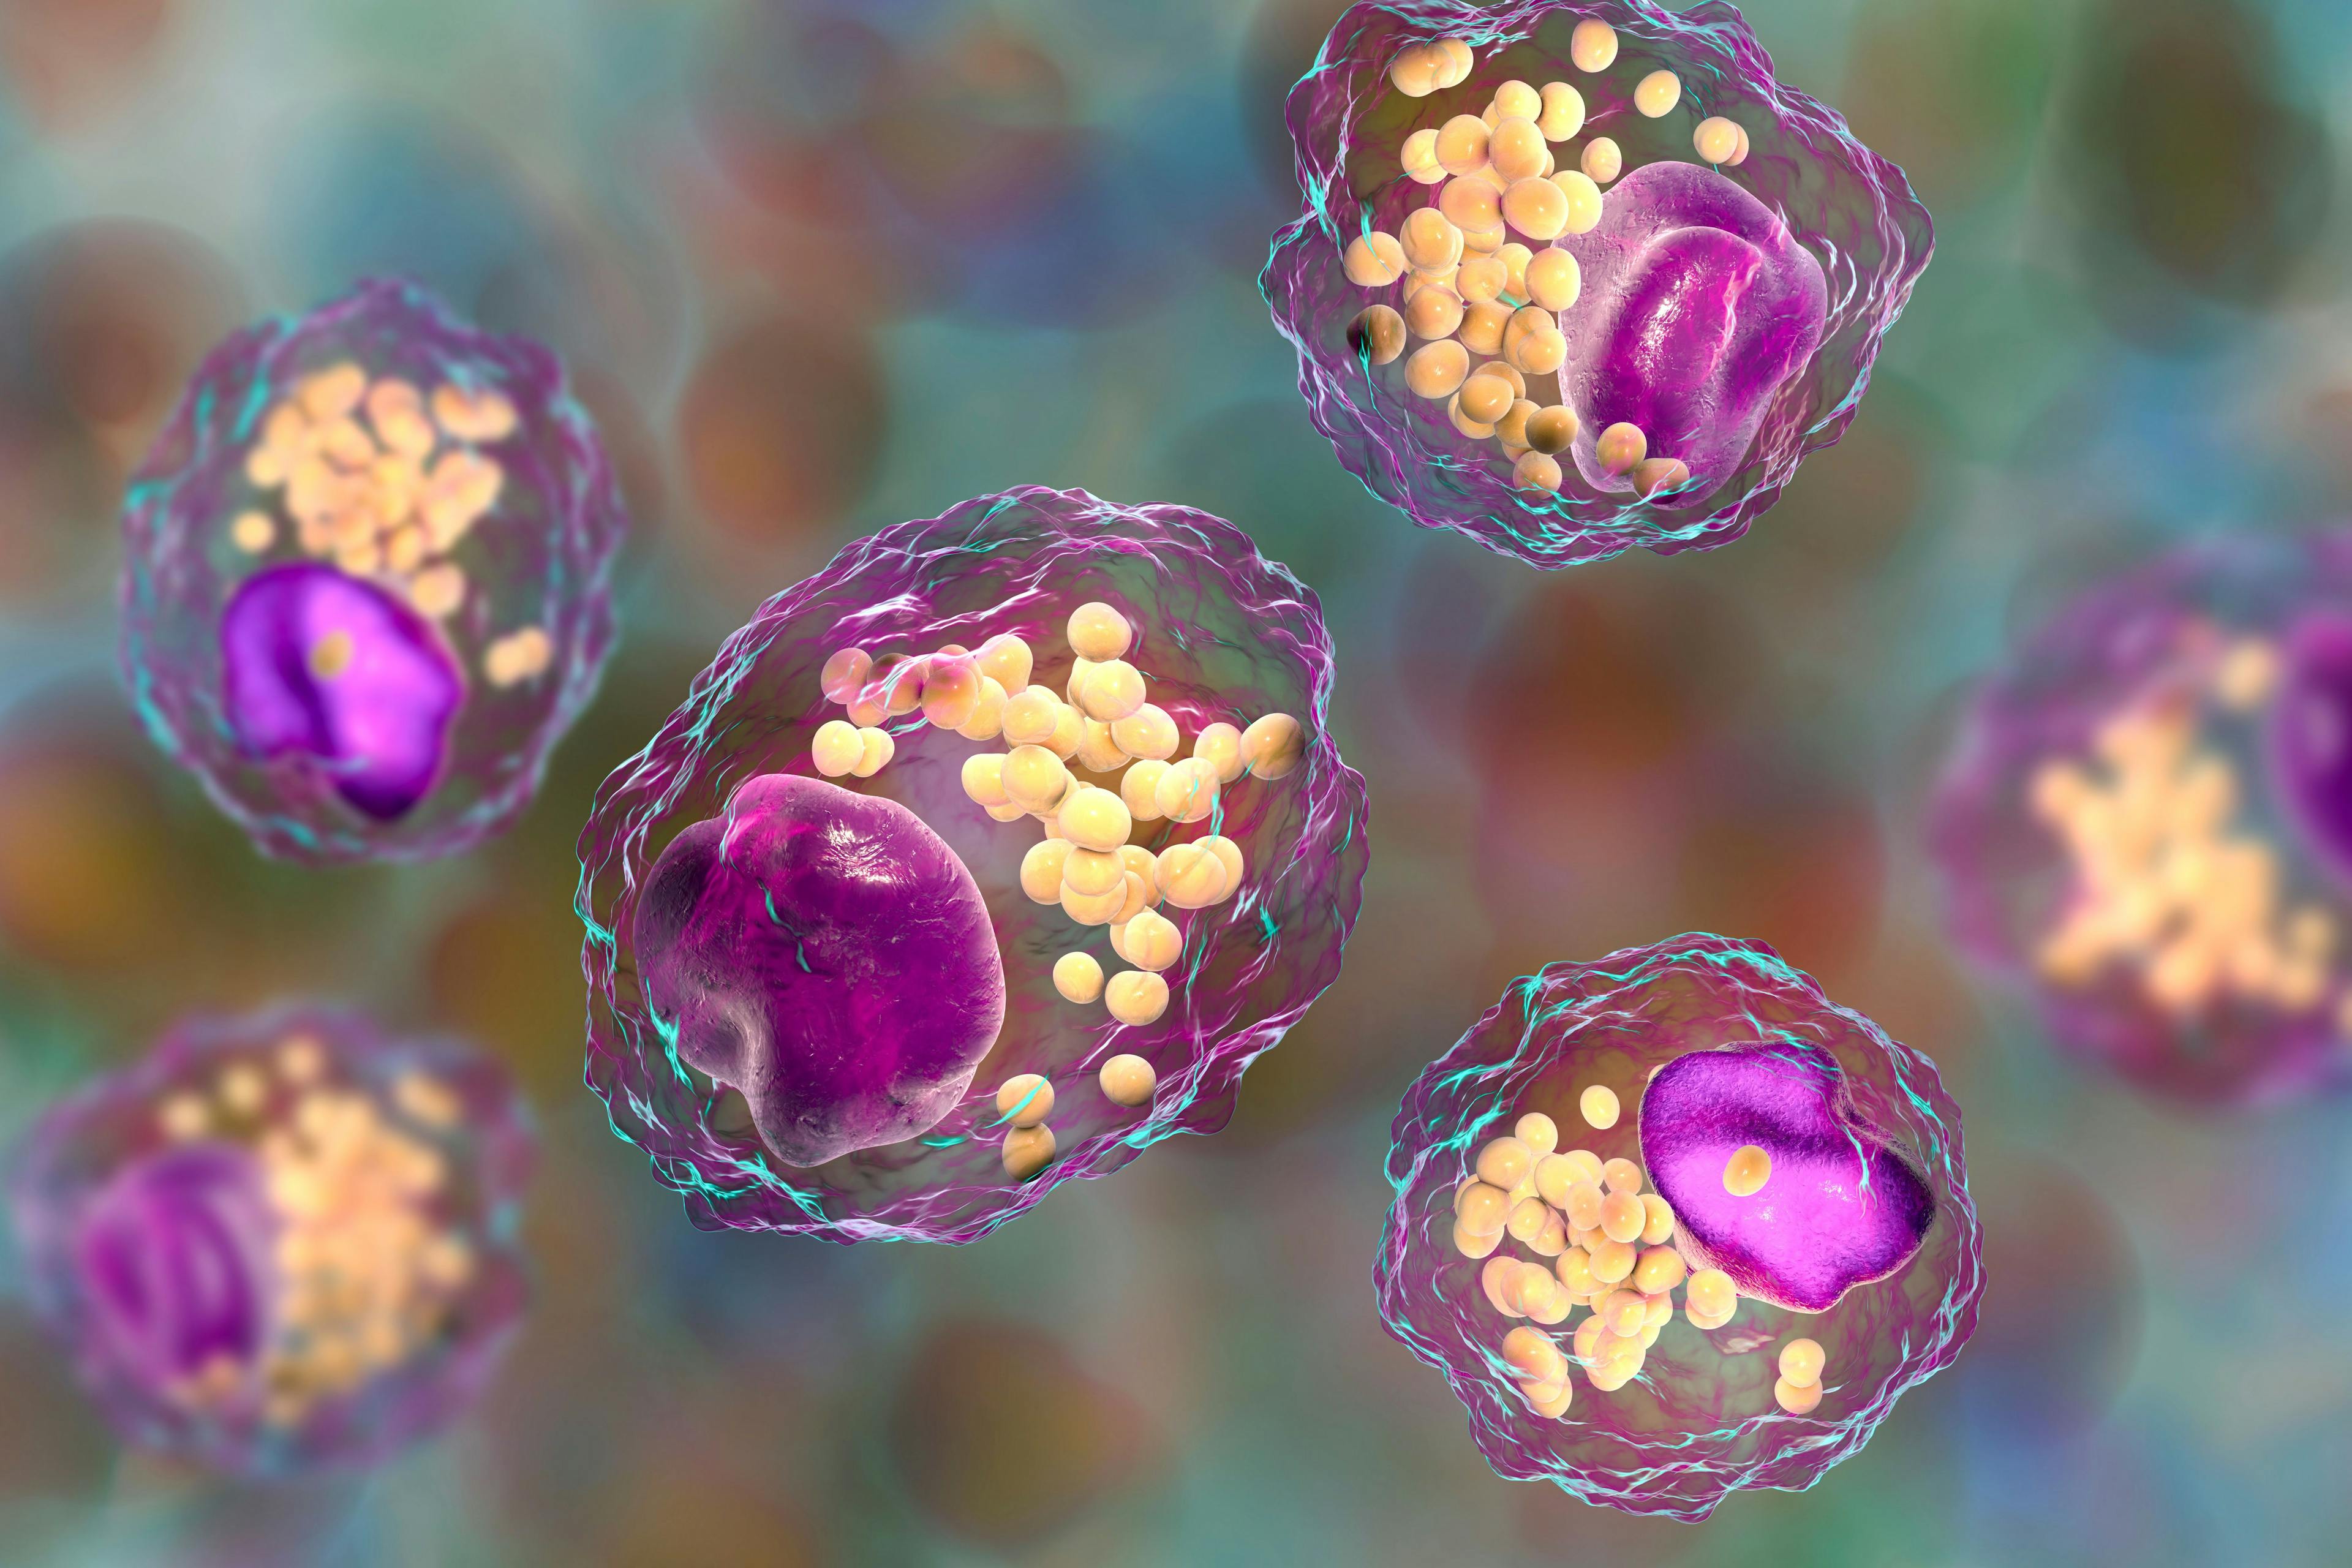 Foam cell, a macrophage cell with lipid droplets | Image Credit: © Dr_Microbe - stock.adobe.com